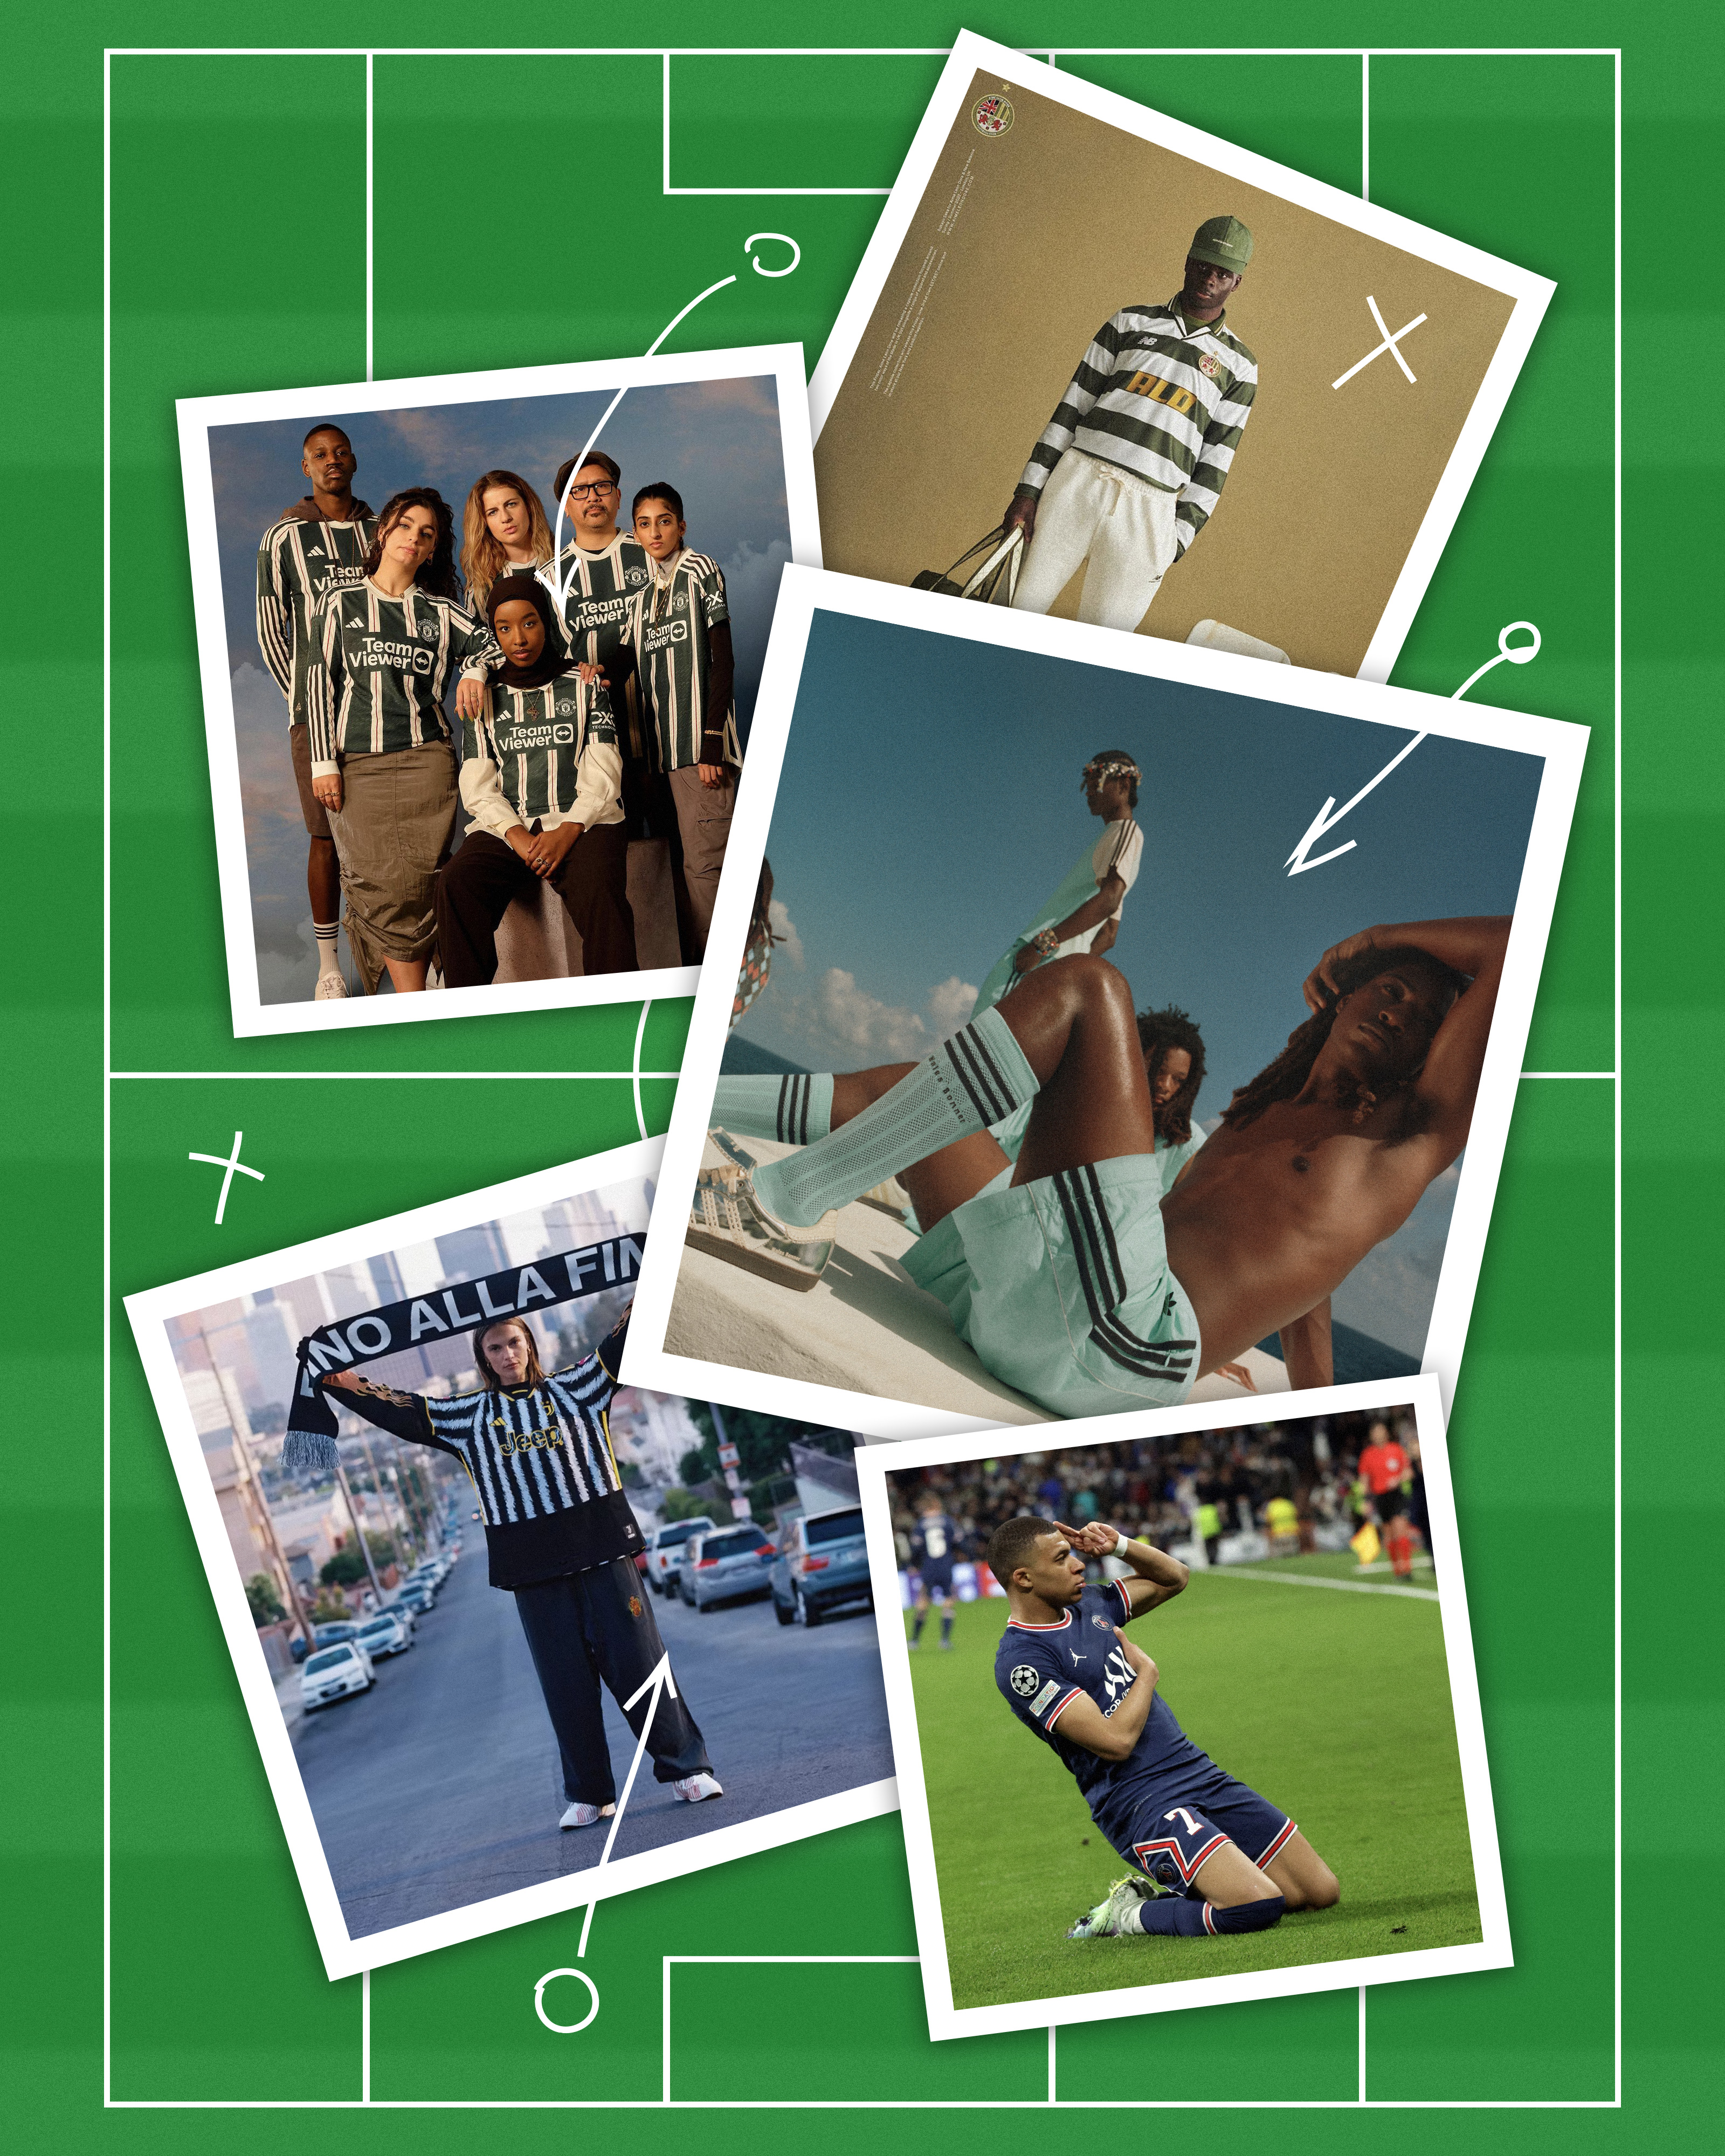 The Ultimate Guide To Football And Fashion